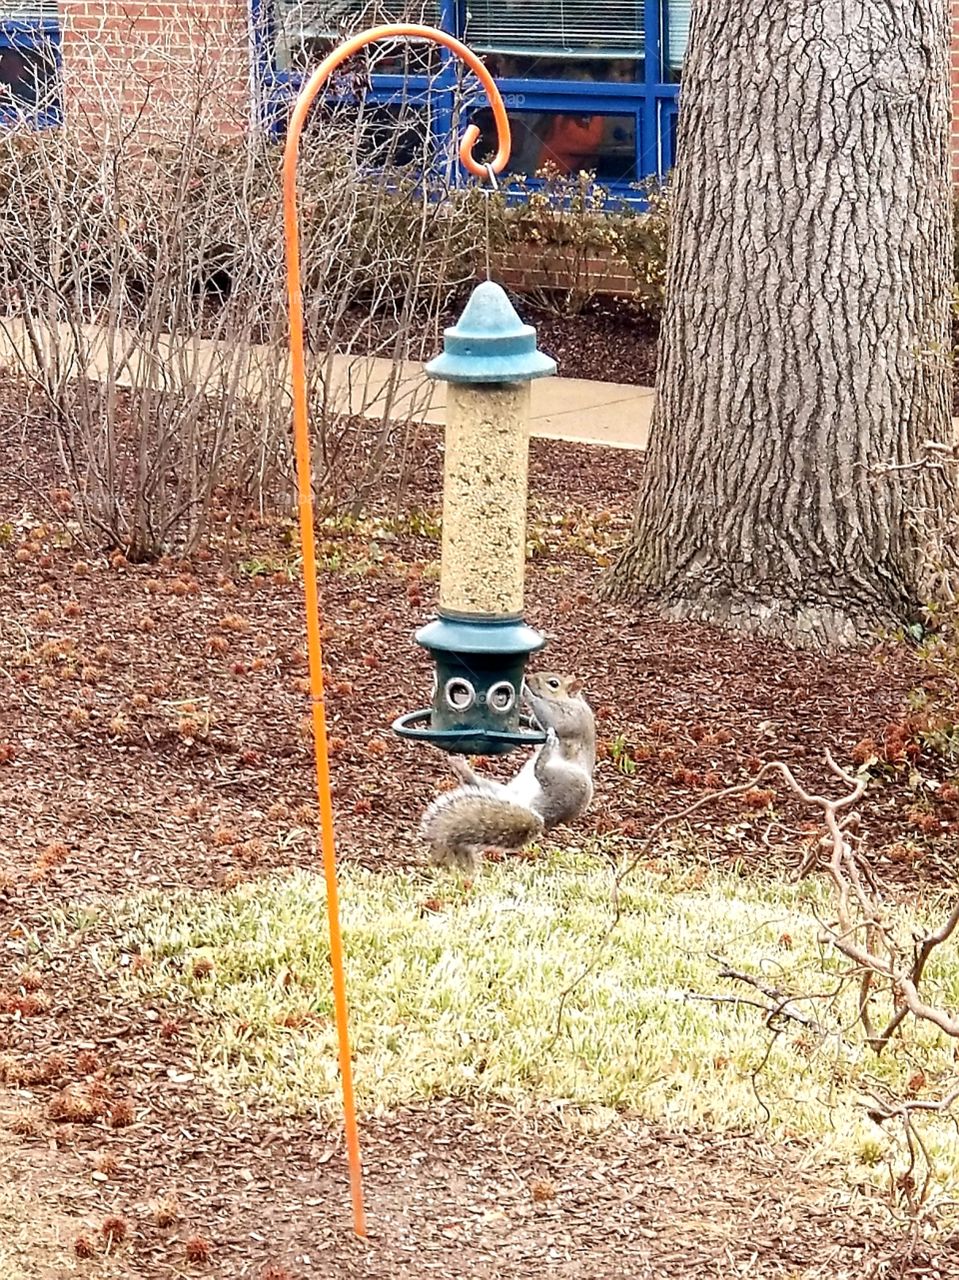 Slick Little guy trying to get food no matter what, squirrel playing mission impossible